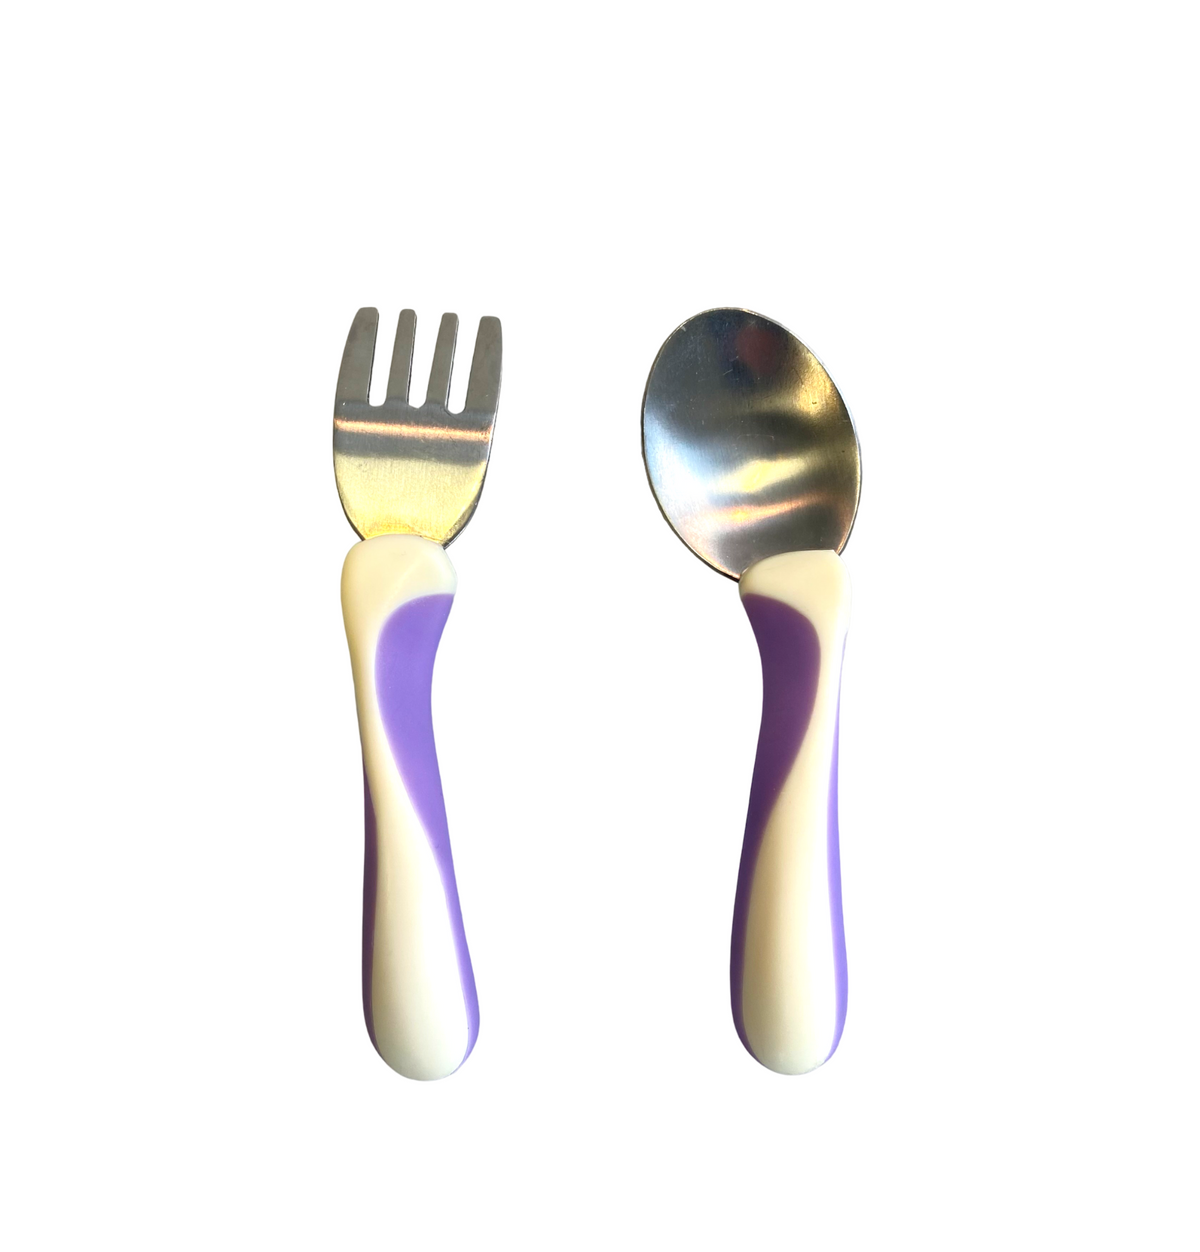 My First Spoon & Fork